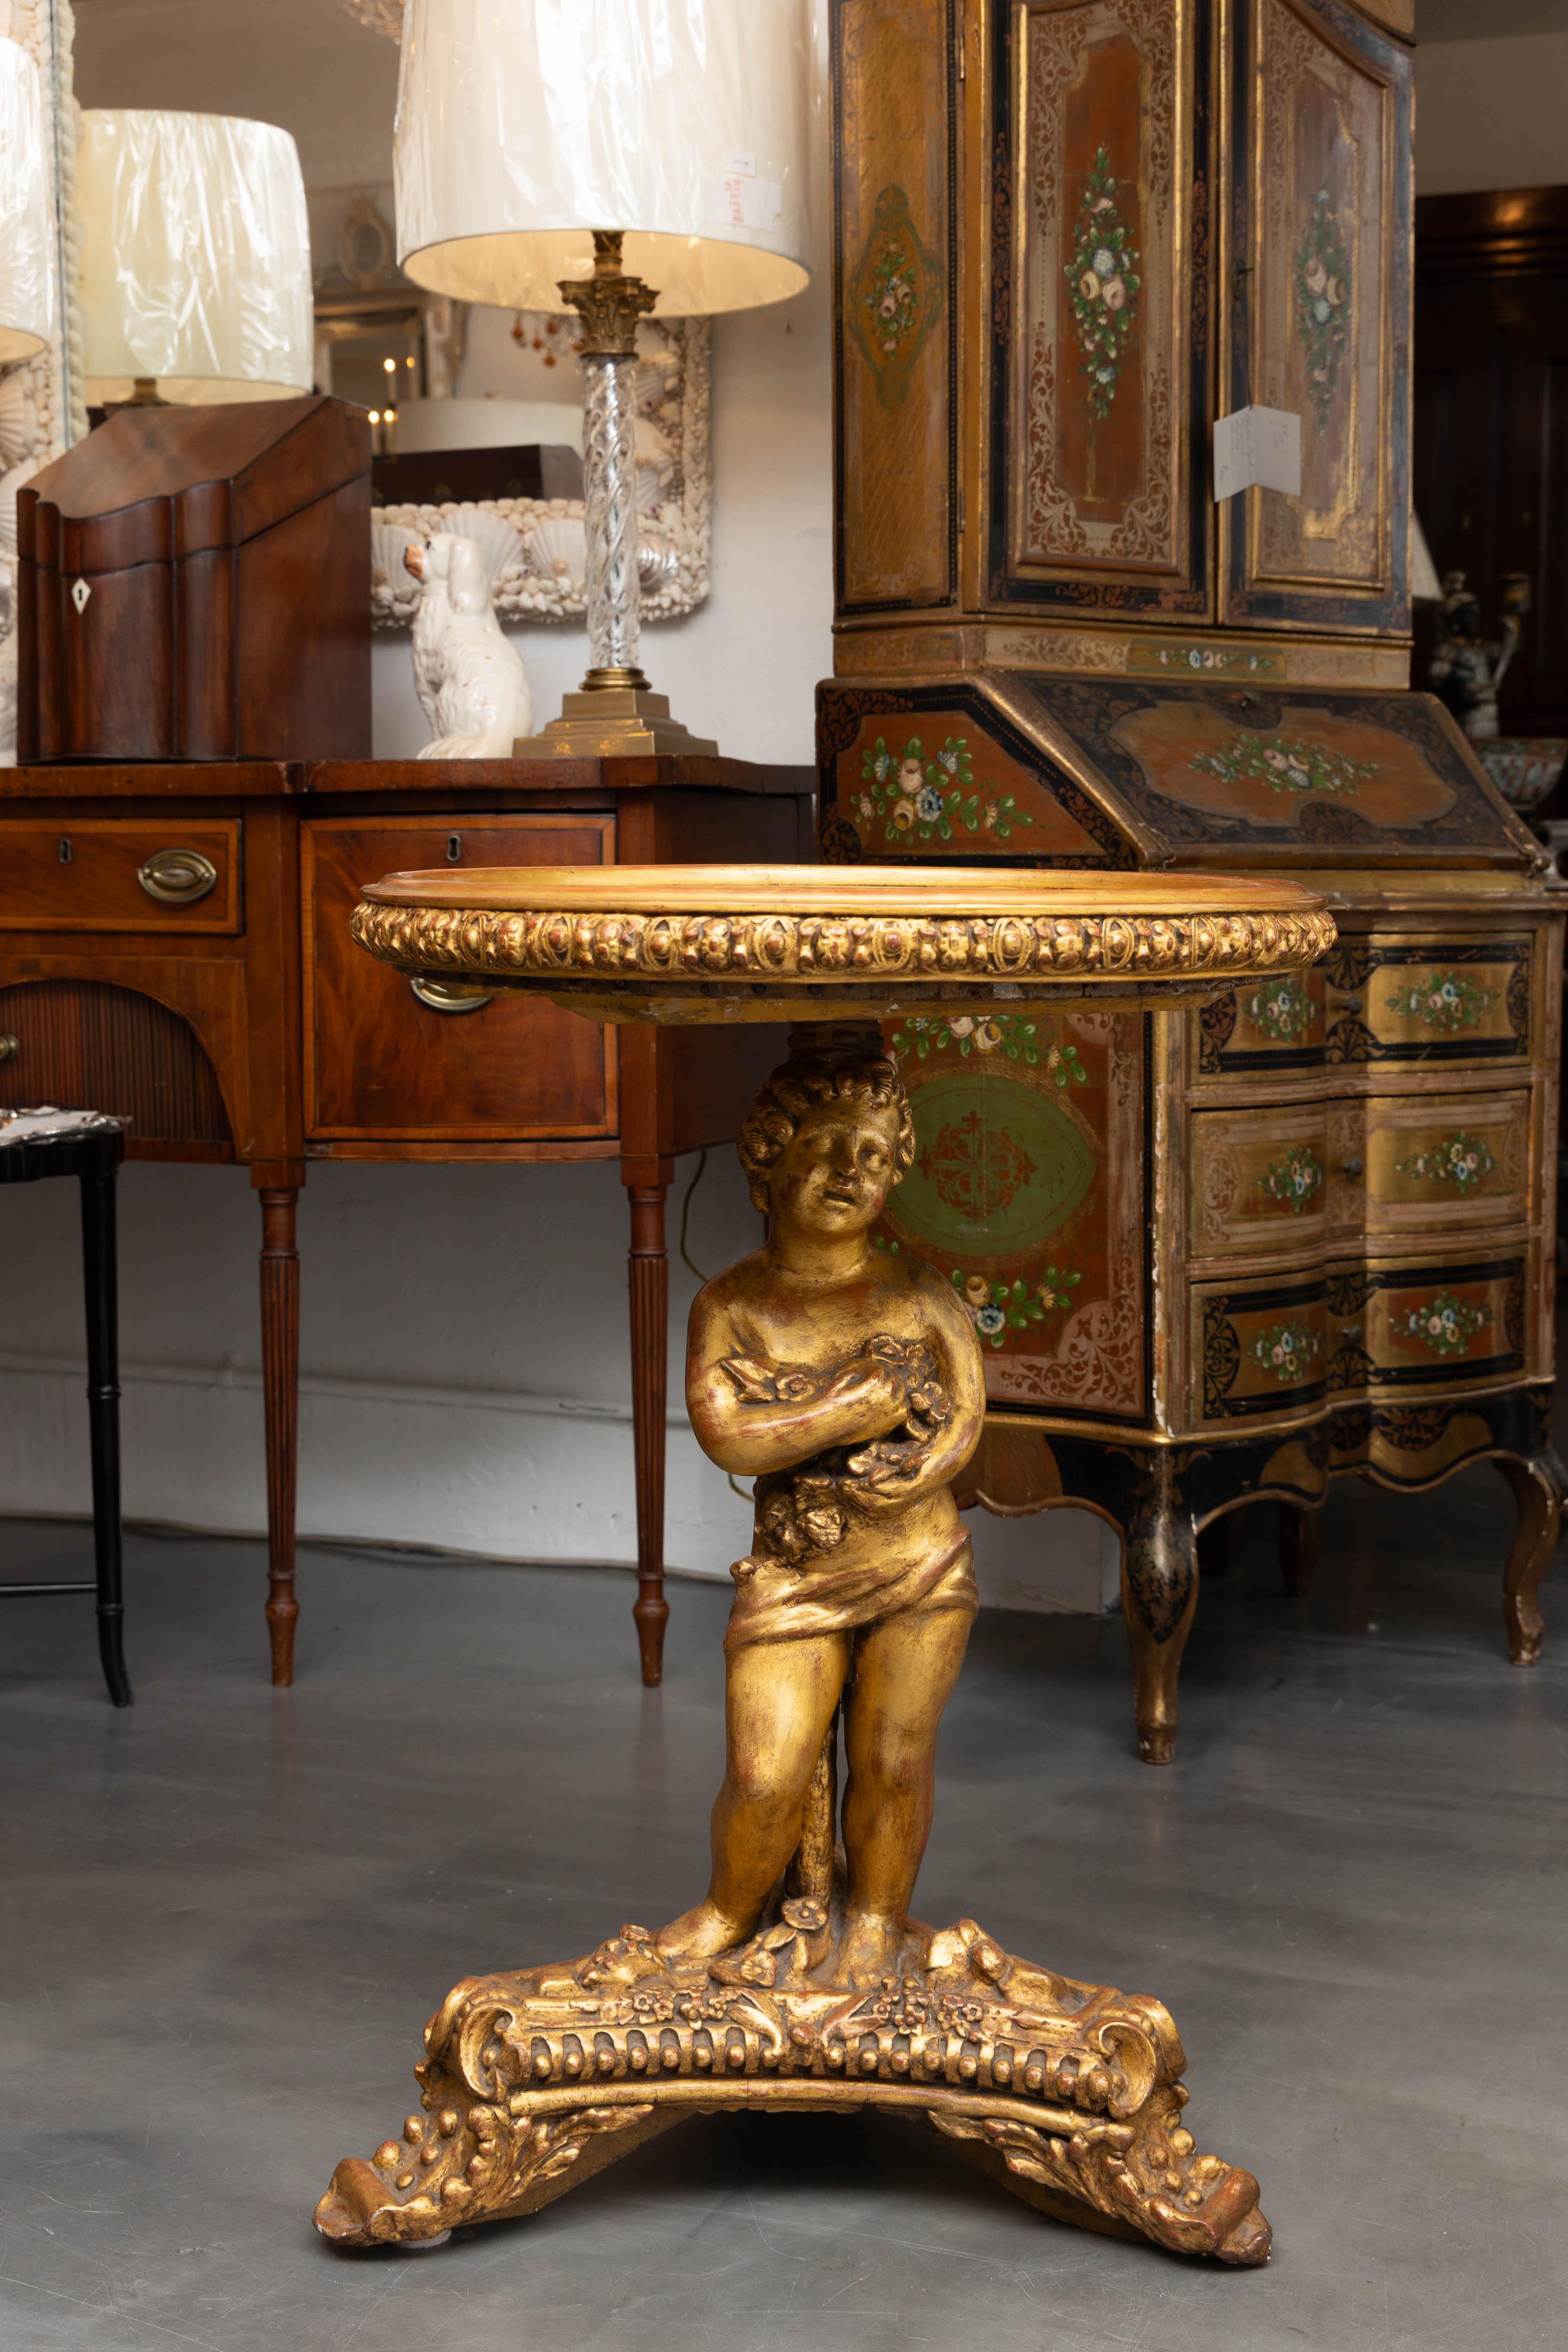 This is a very special hand carved 19th century Italian gilt wood Putto serving as a pedestal holding a table top inlaid with a variety of marble squares in a chess board style.  The top is framed by a circular carved frame and the Putto is situated